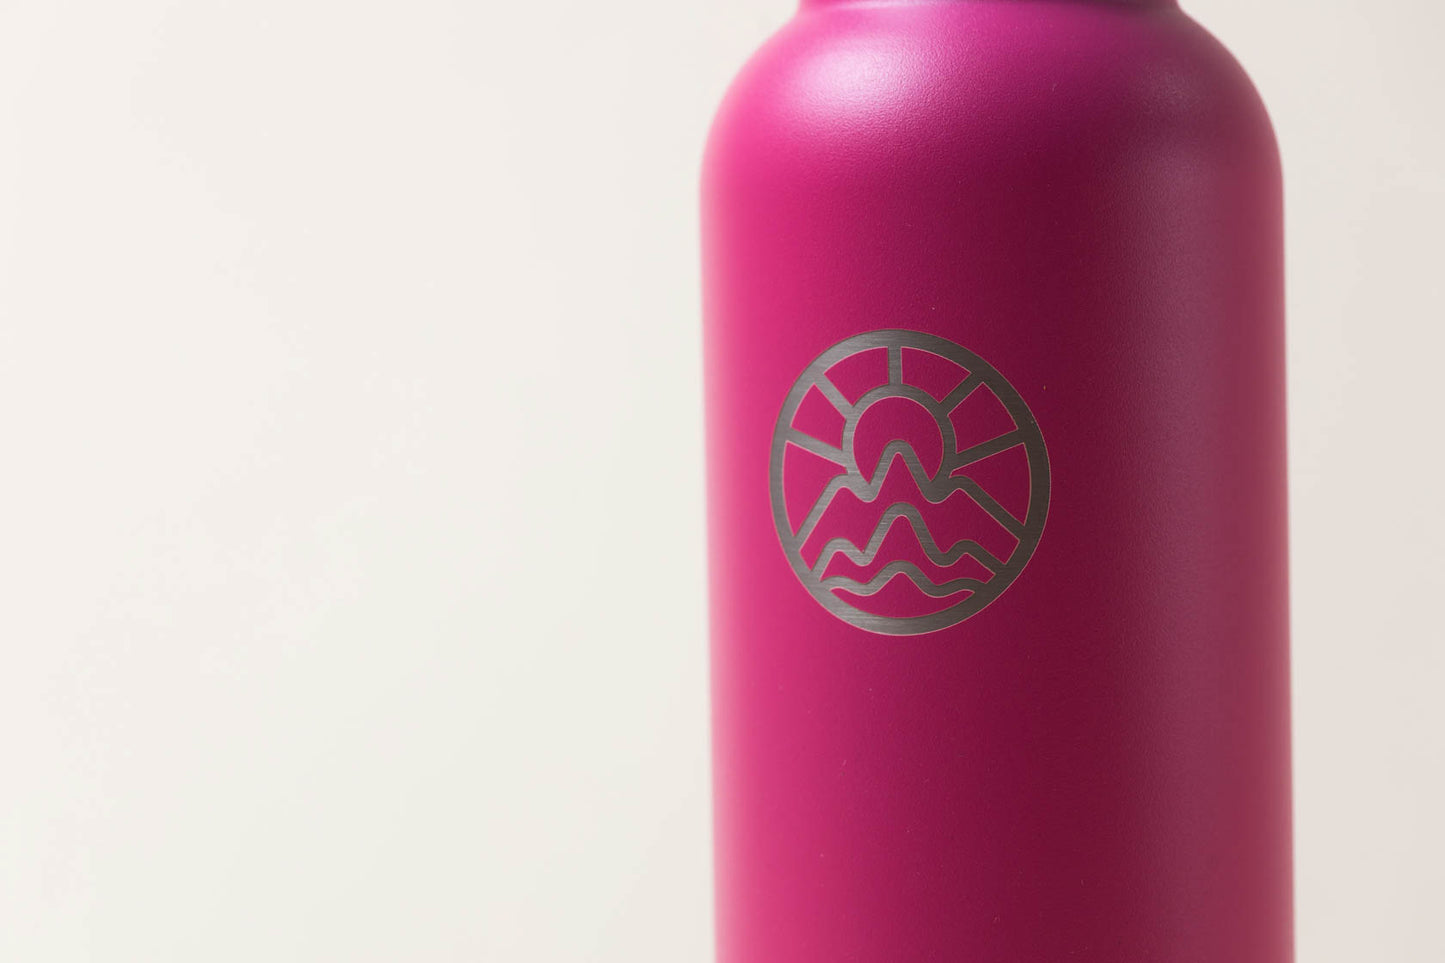 Water Bottle - 24 oz Stainless Steel Insulated - Pink